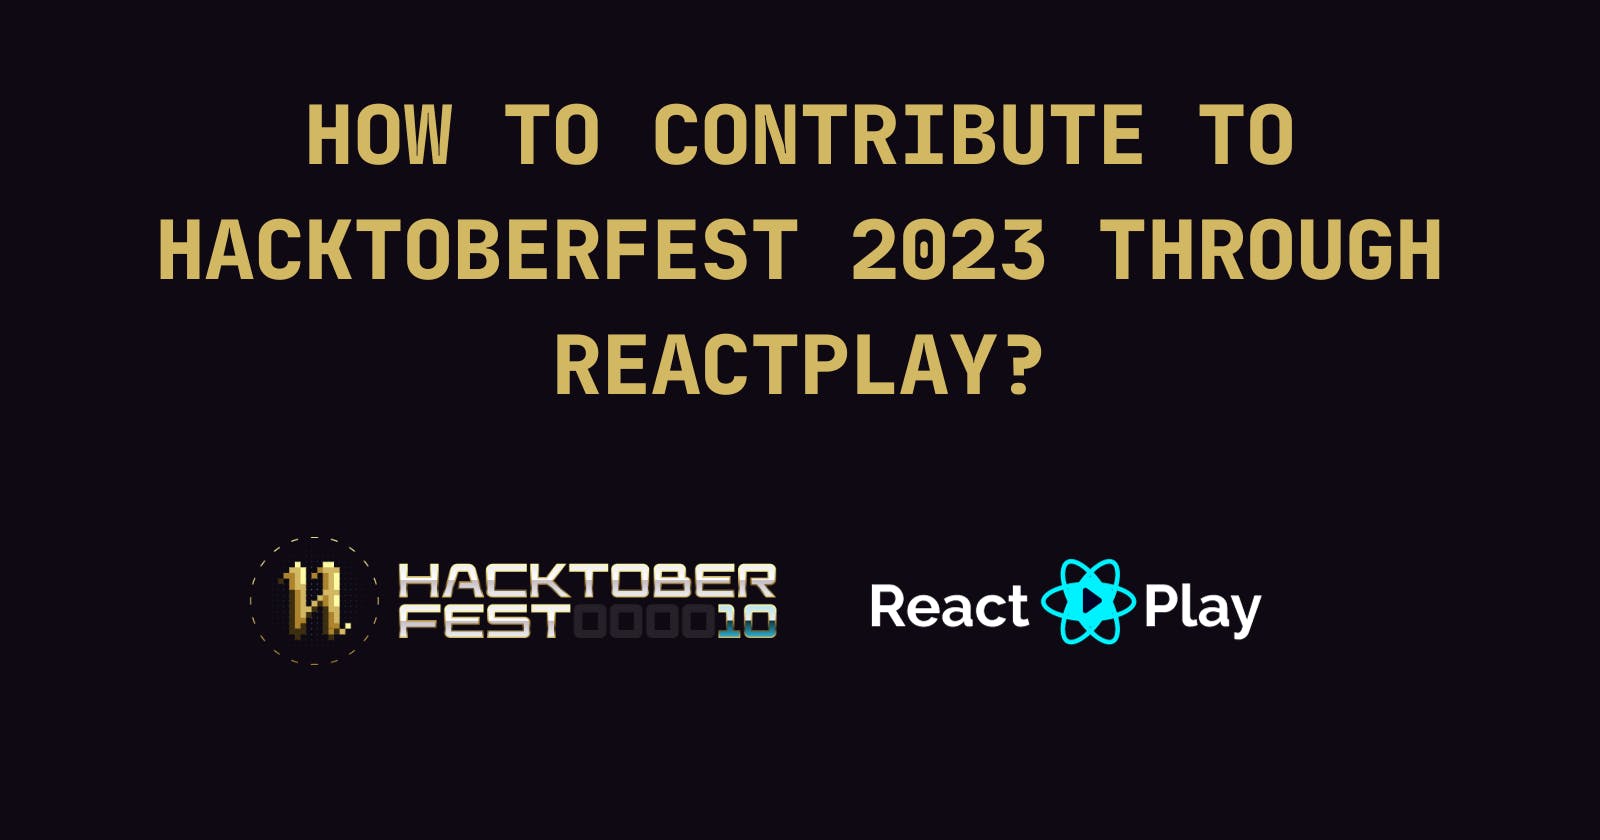 How to contribute to Hacktoberfest 2023 through ReactPlay?